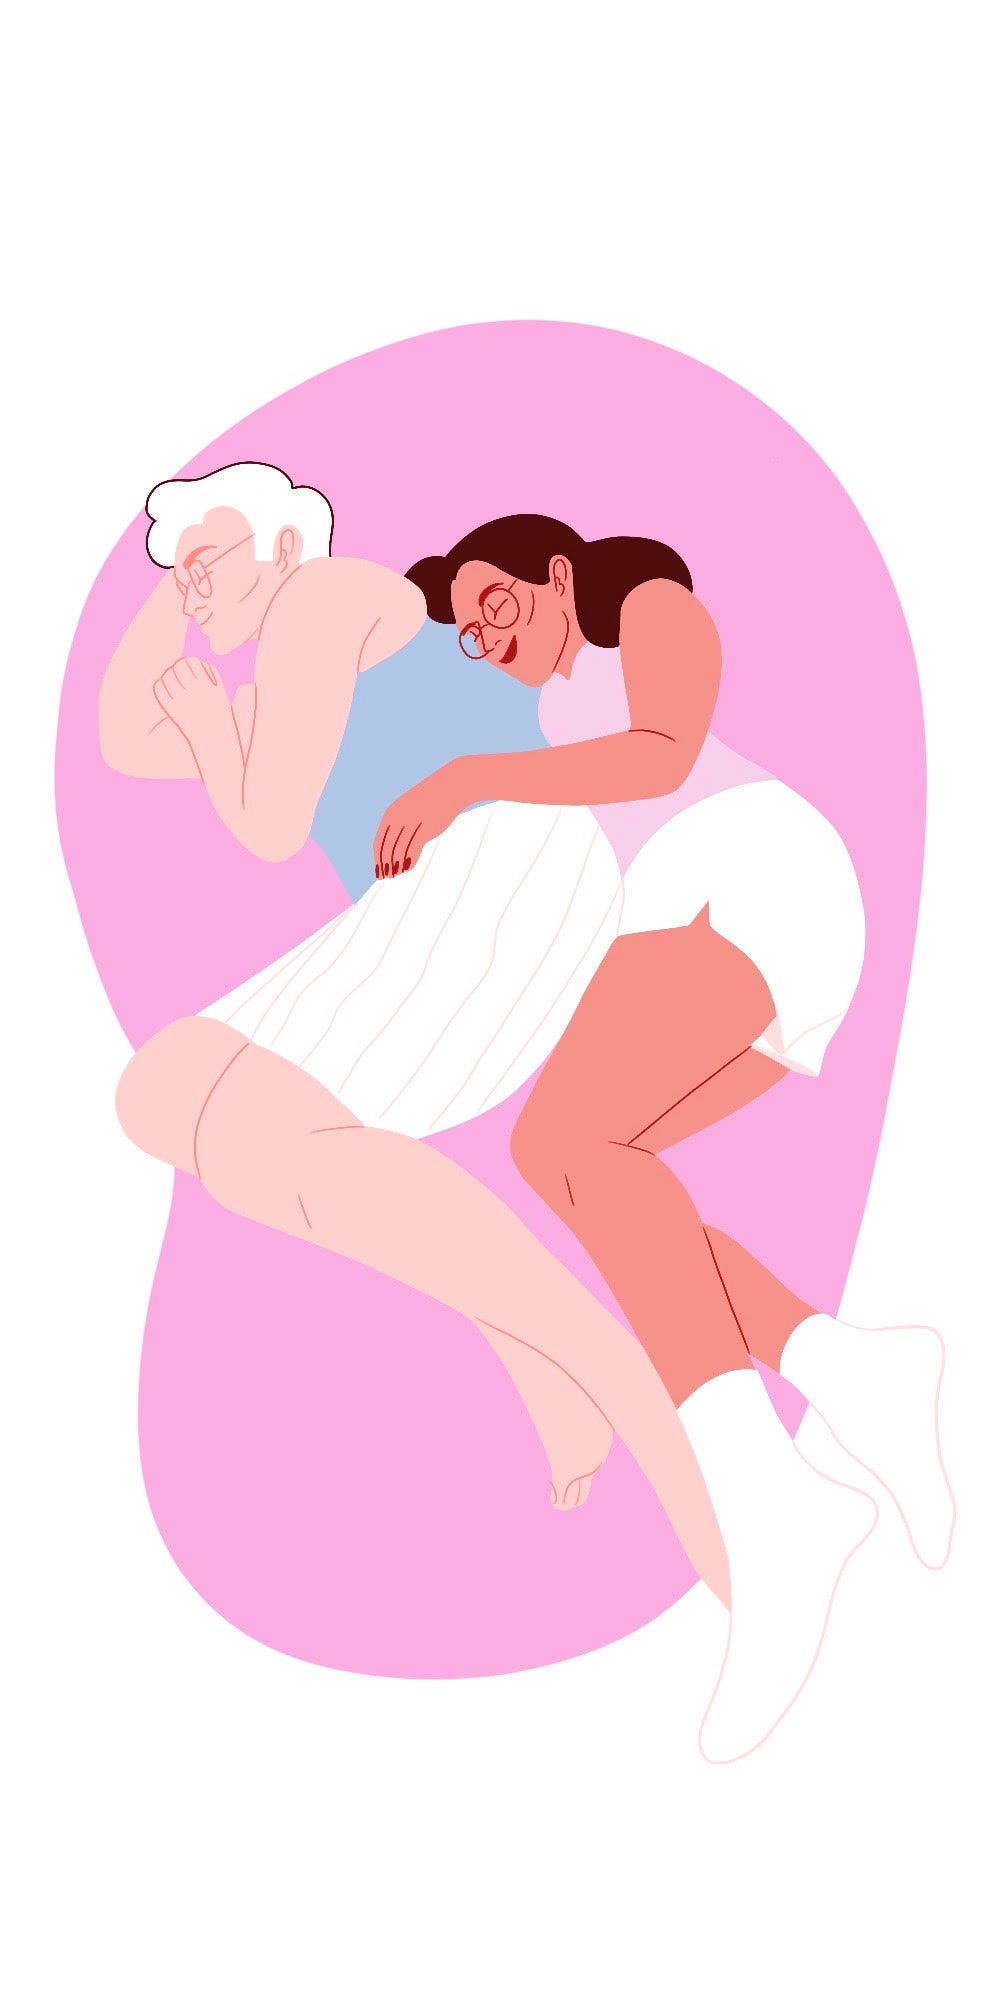 snuggling positions